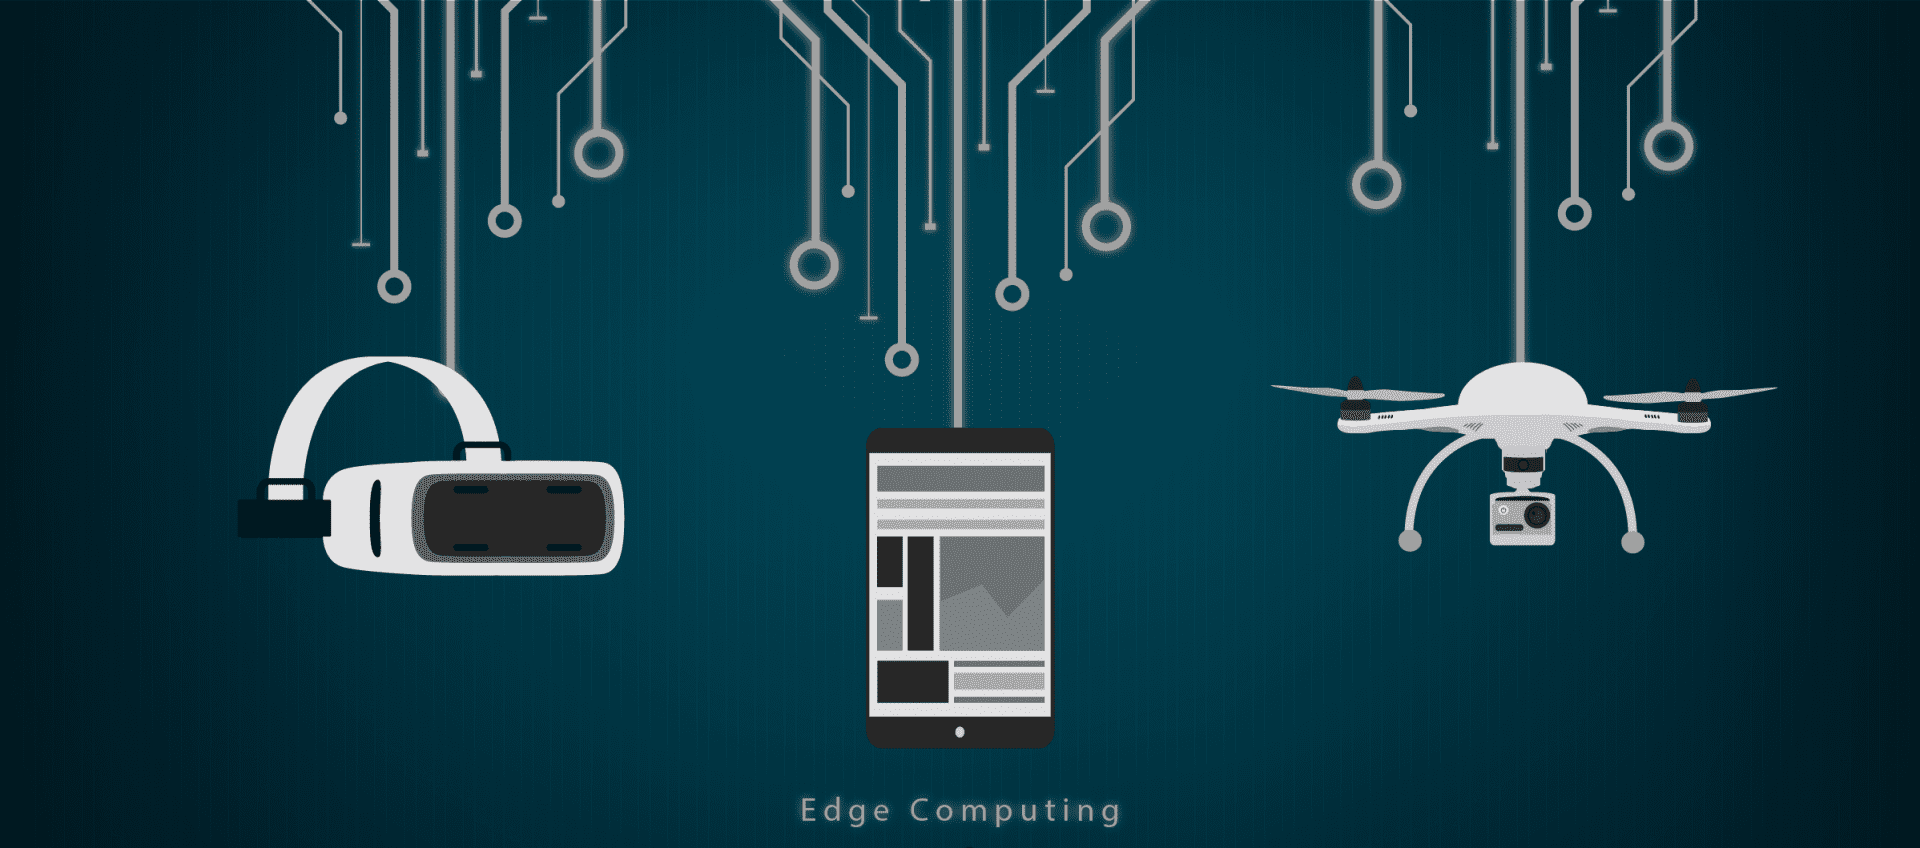 smartphones, drones and virtual/augmented reality evolve with mobile edge computing